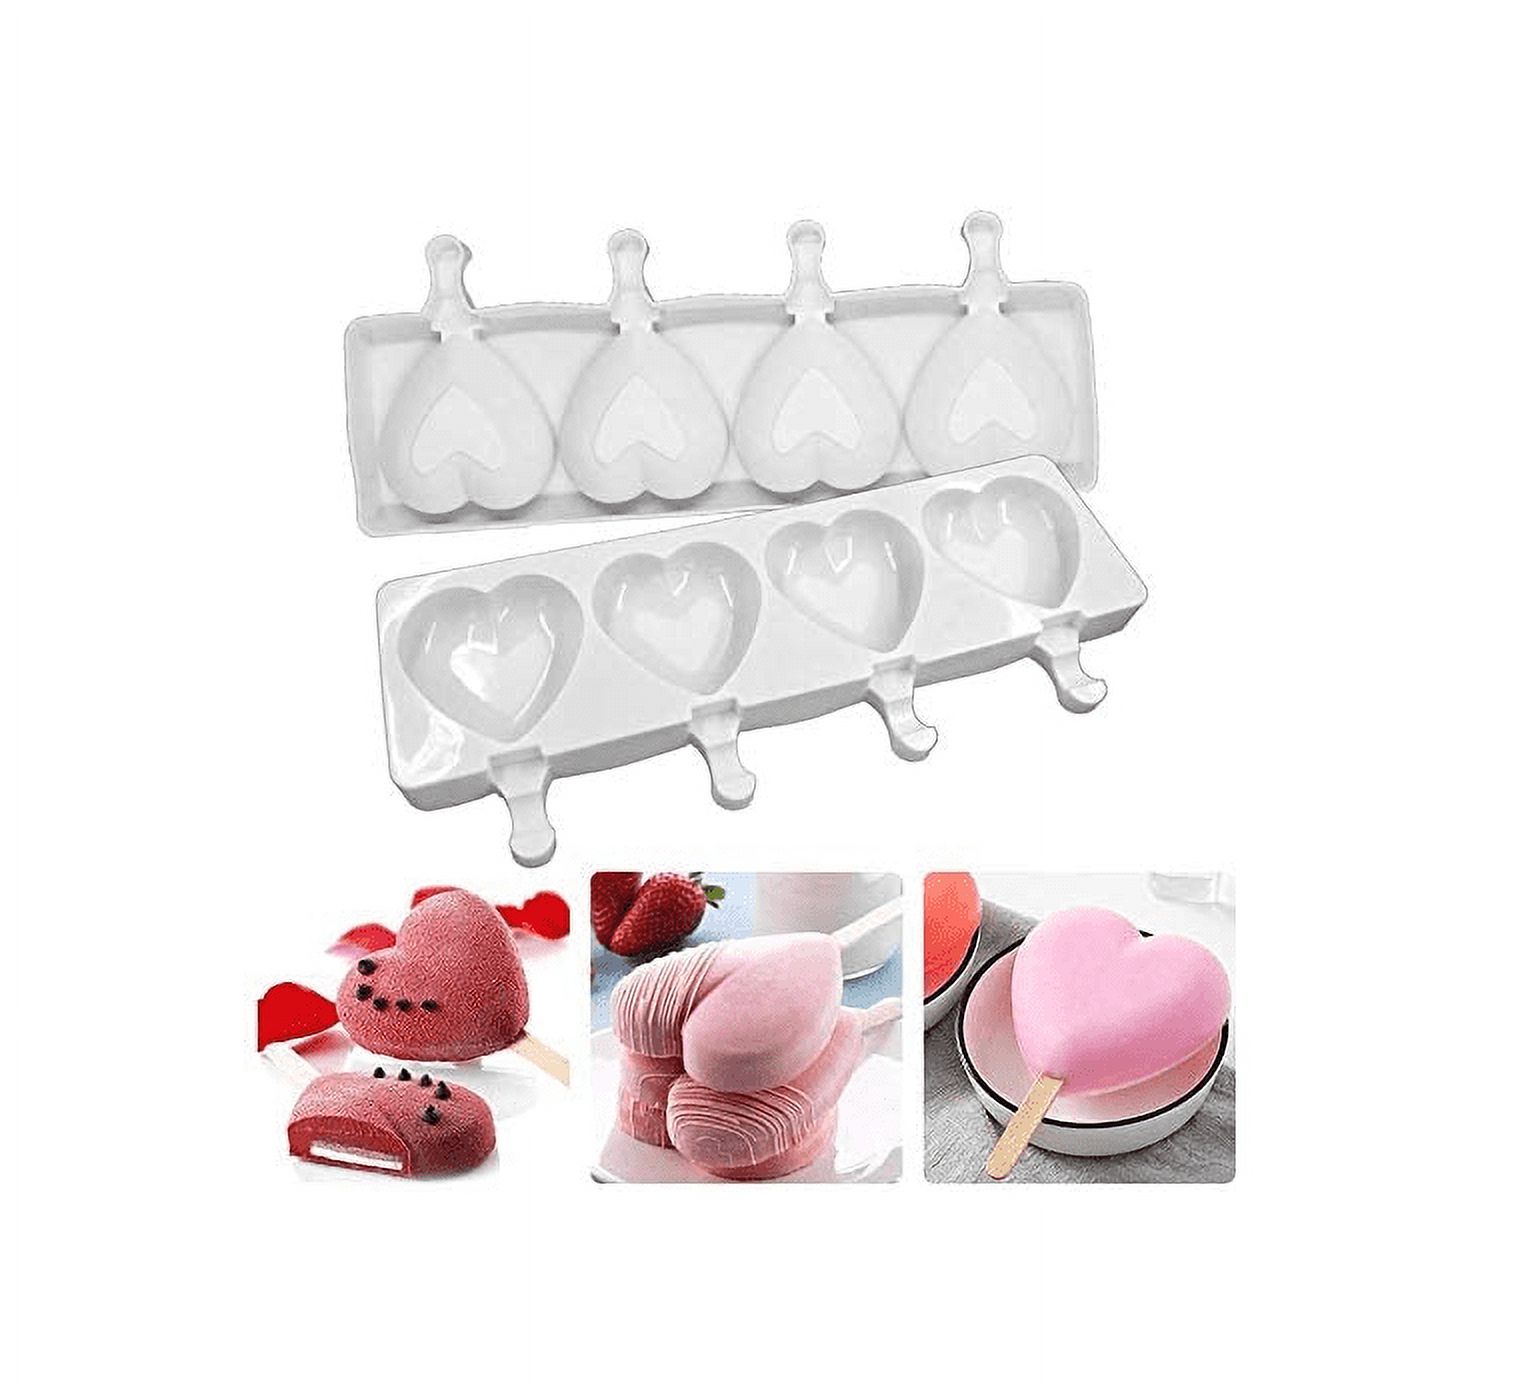 Ice Pop Molds Silicone Popsicle Molds 4 Cavities Homemade Ice Cream Mold Heart Ice Cream Mold Reusable Soft Silicone,Silicone Popsicle Molds Cake,Cakesicle Mold for DIY Ice Pops - image 3 of 7